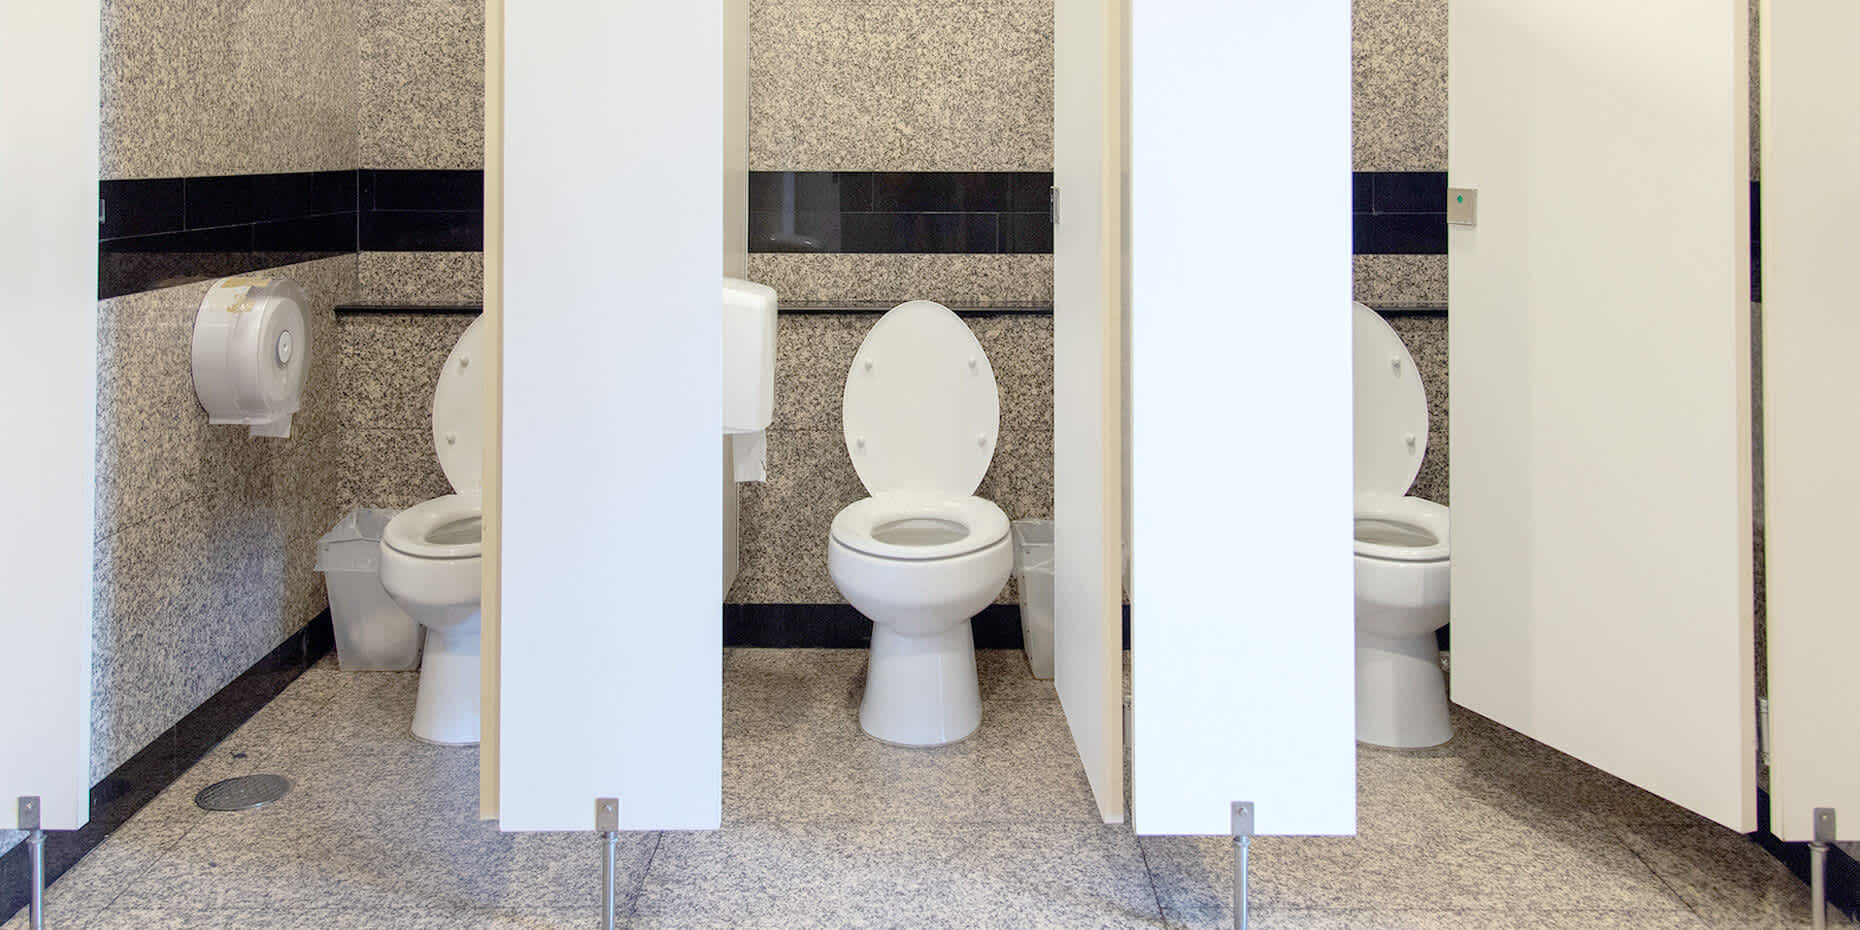 Bathroom stalls with toilets to represent polyuria, excessive urination